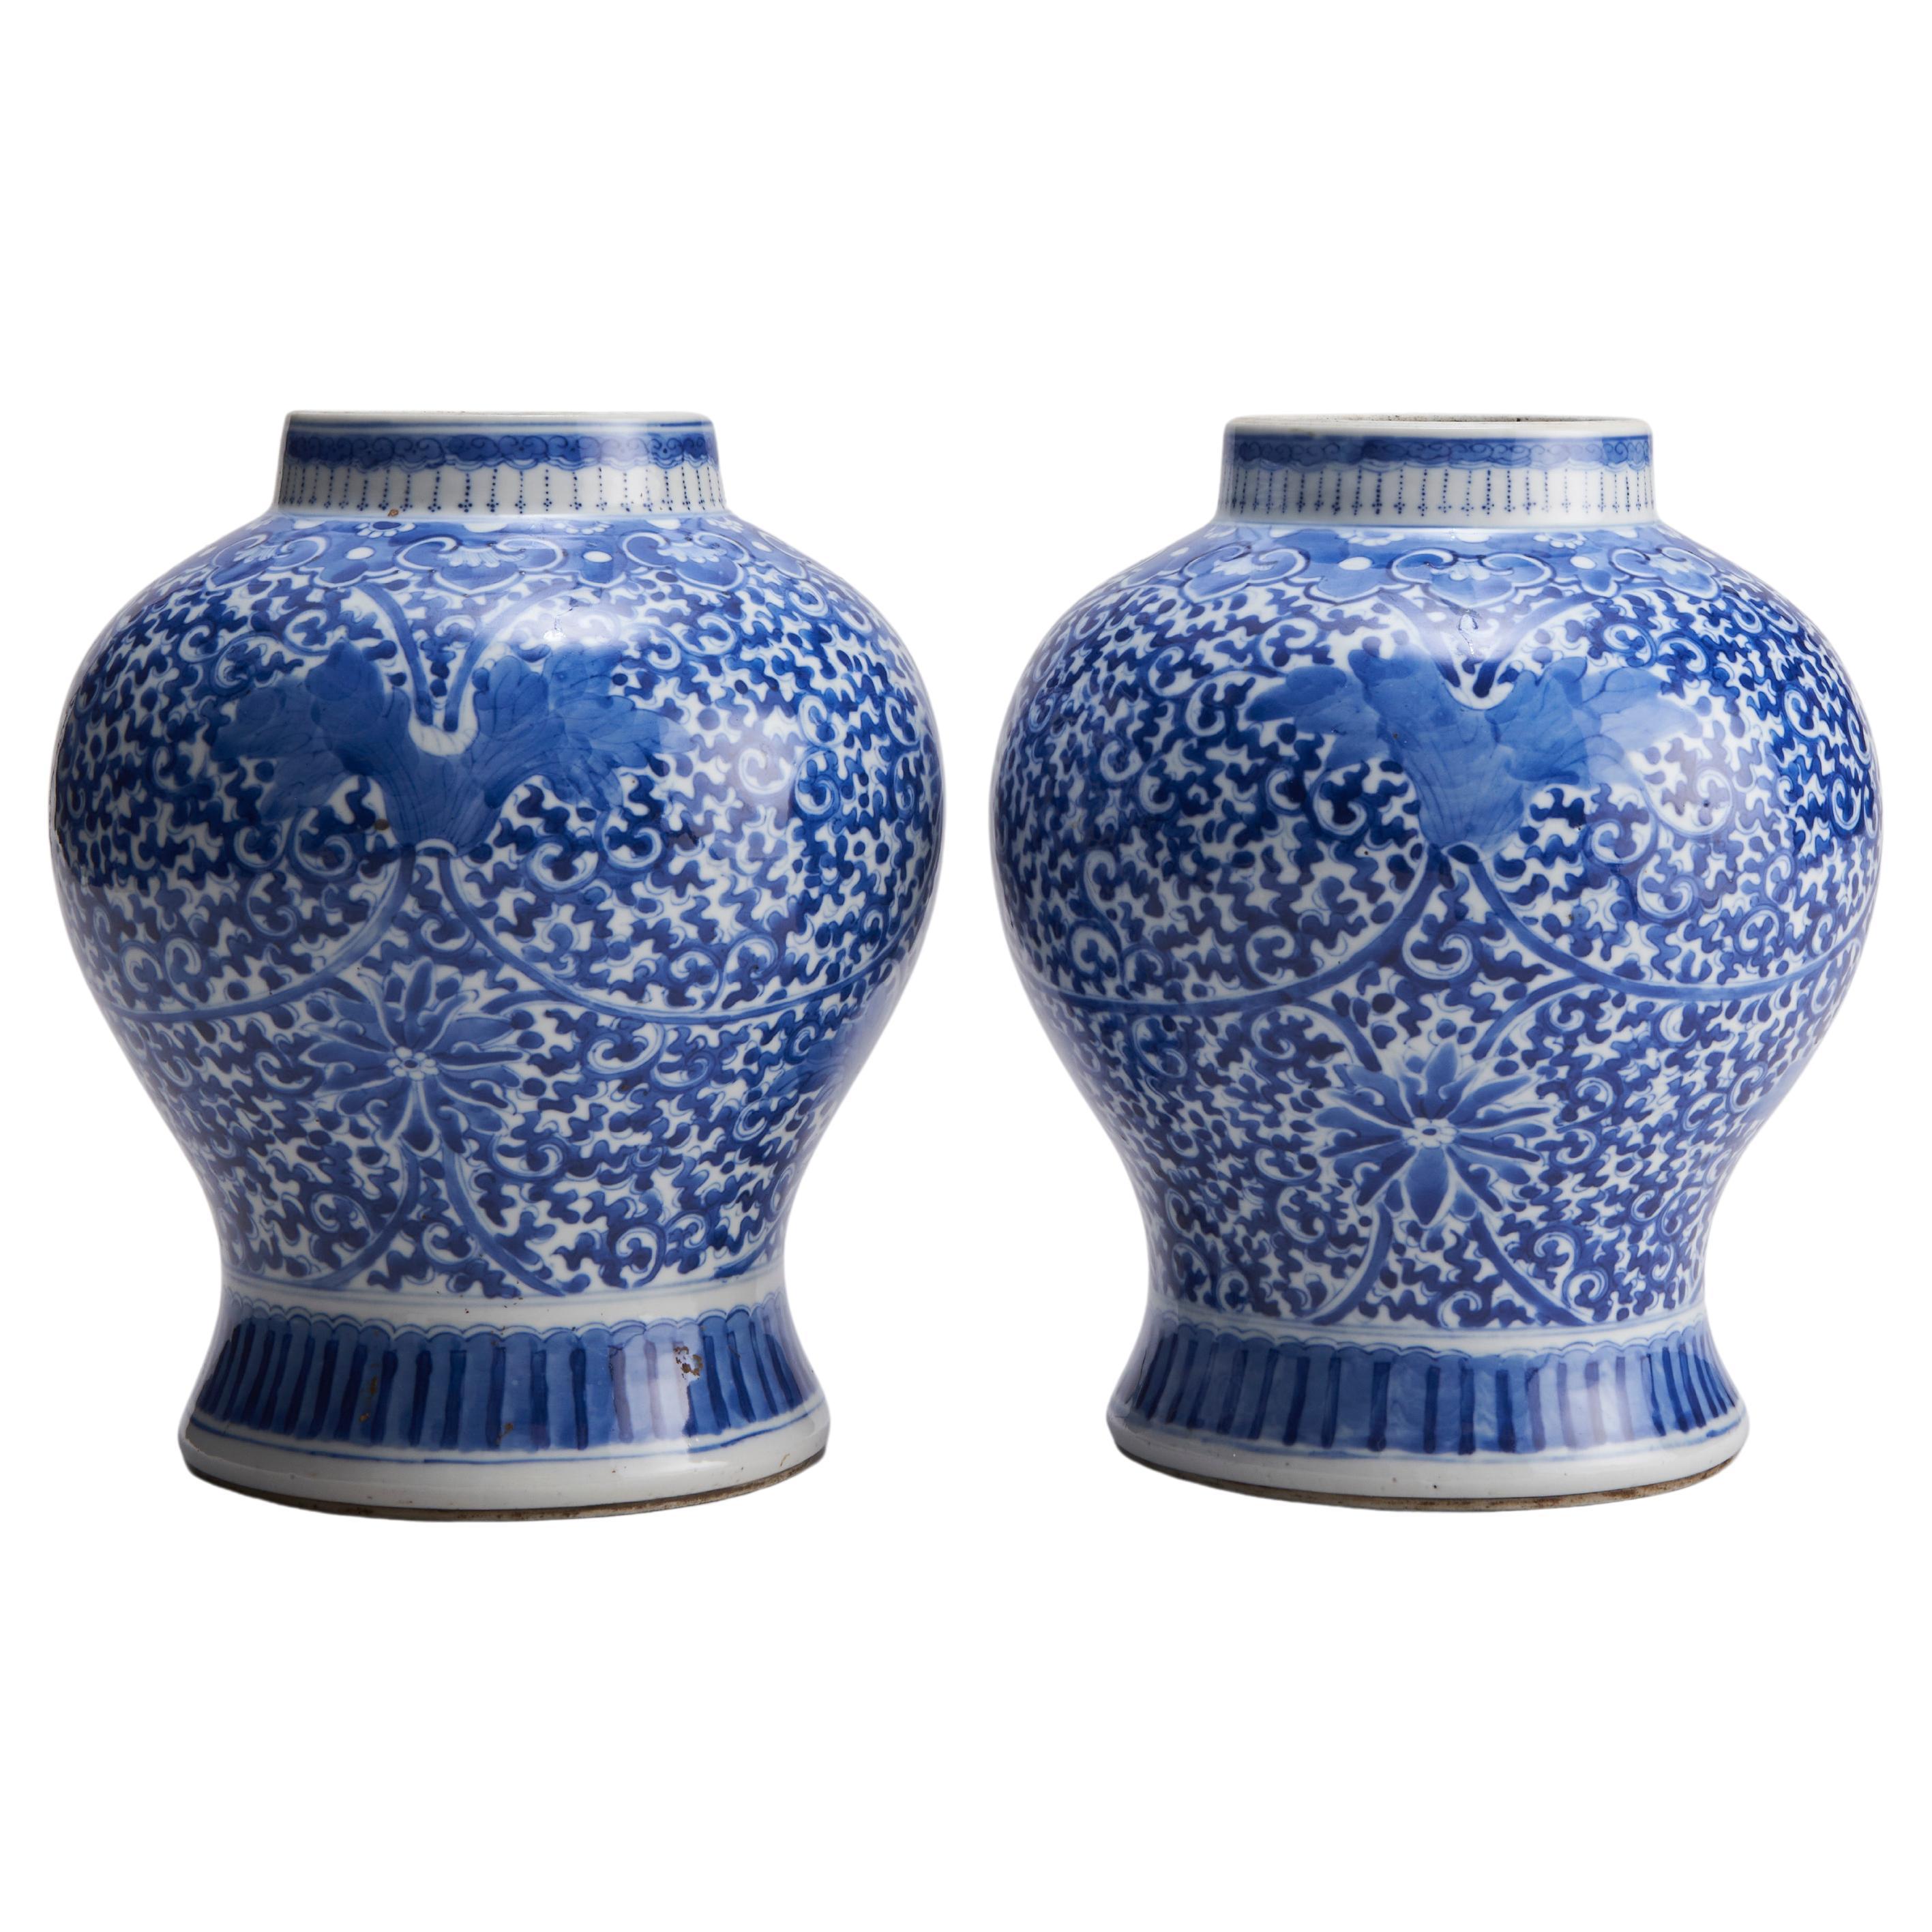 A pair of antique 19th Century Chinese blue and white porcelain jars with Clemat